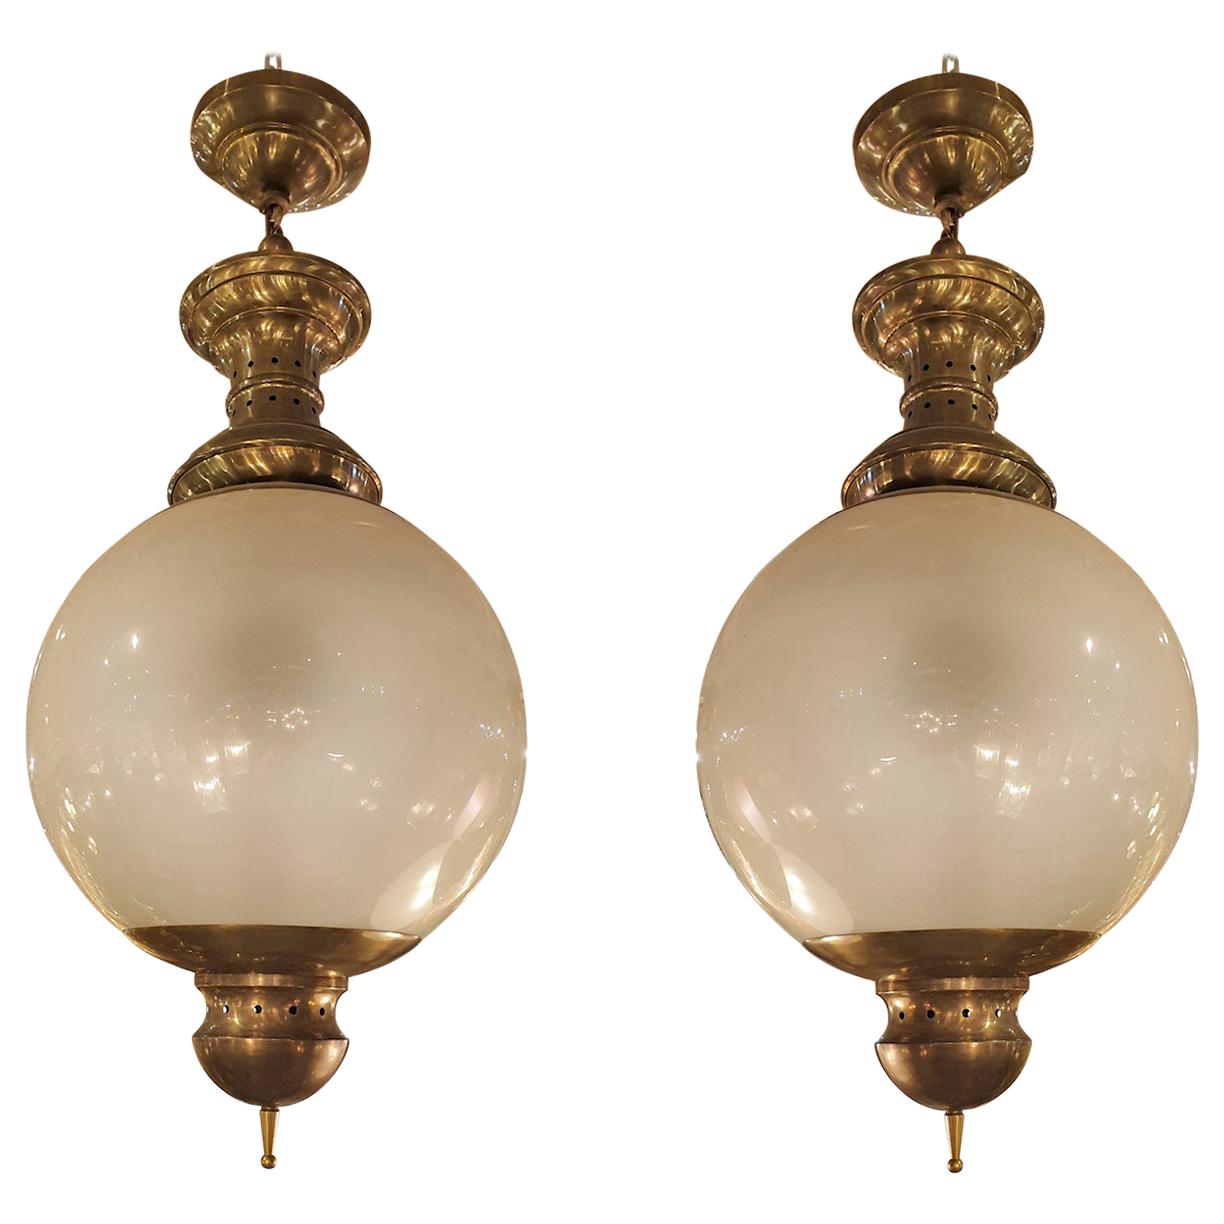 Pair of Large Mid-Century Modern Brass and Glass Chandeliers by Dominioni, 1960s